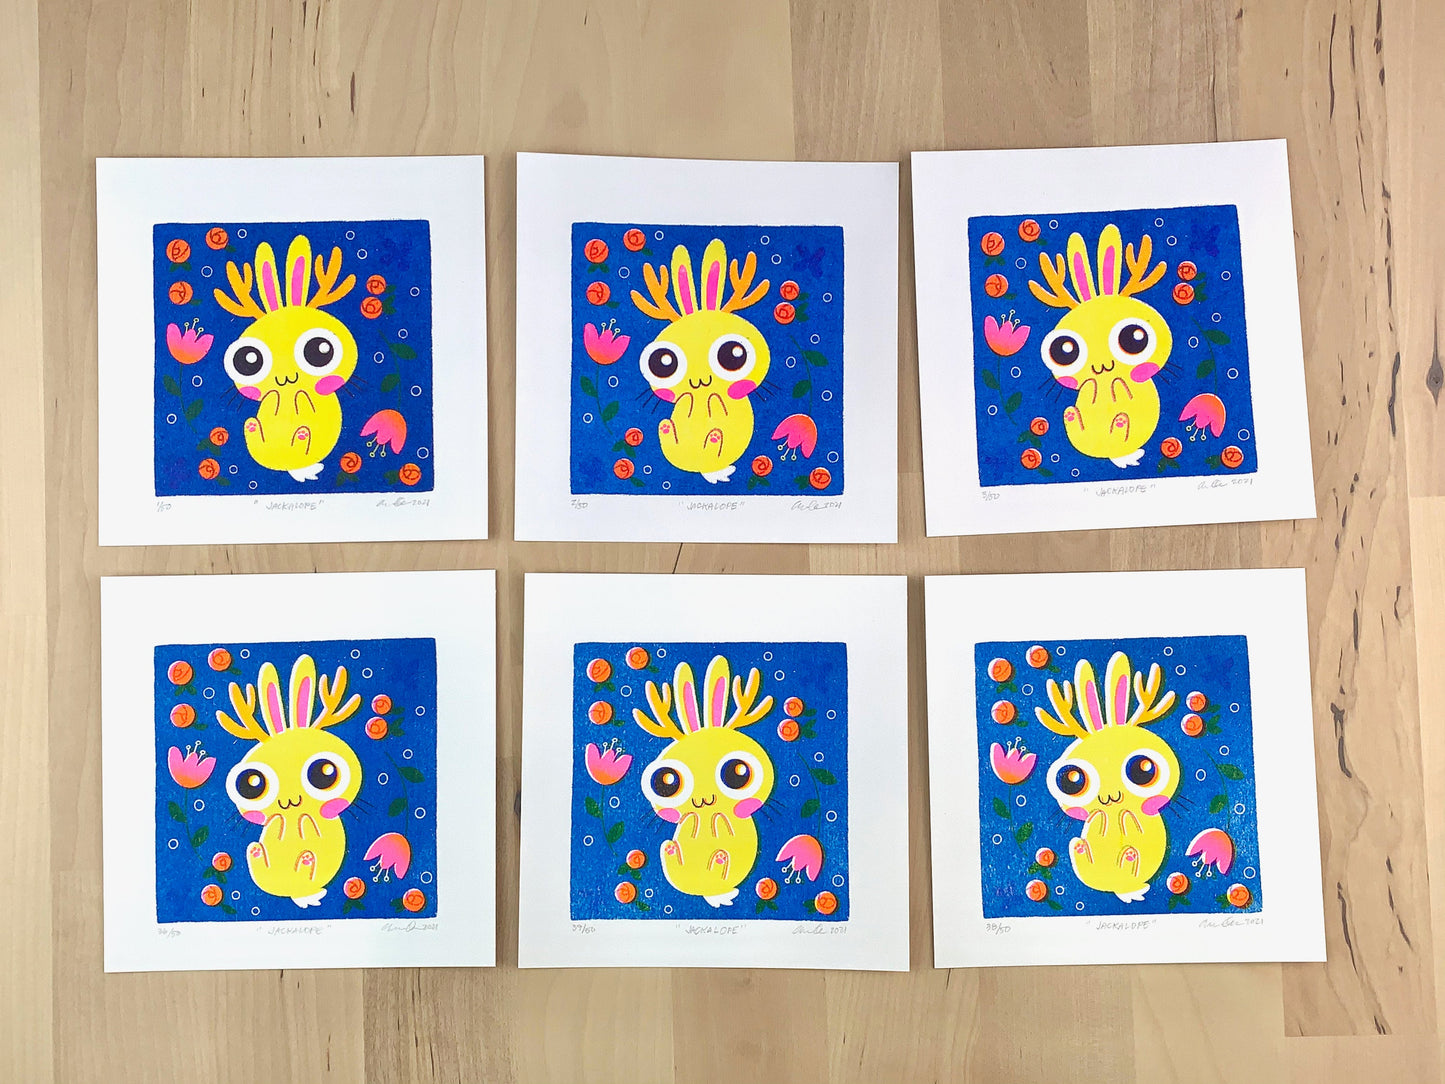 Six Risograph prints of a cute yellow jackalope bunny illustration on a blue background and flowers showing the unique variations.